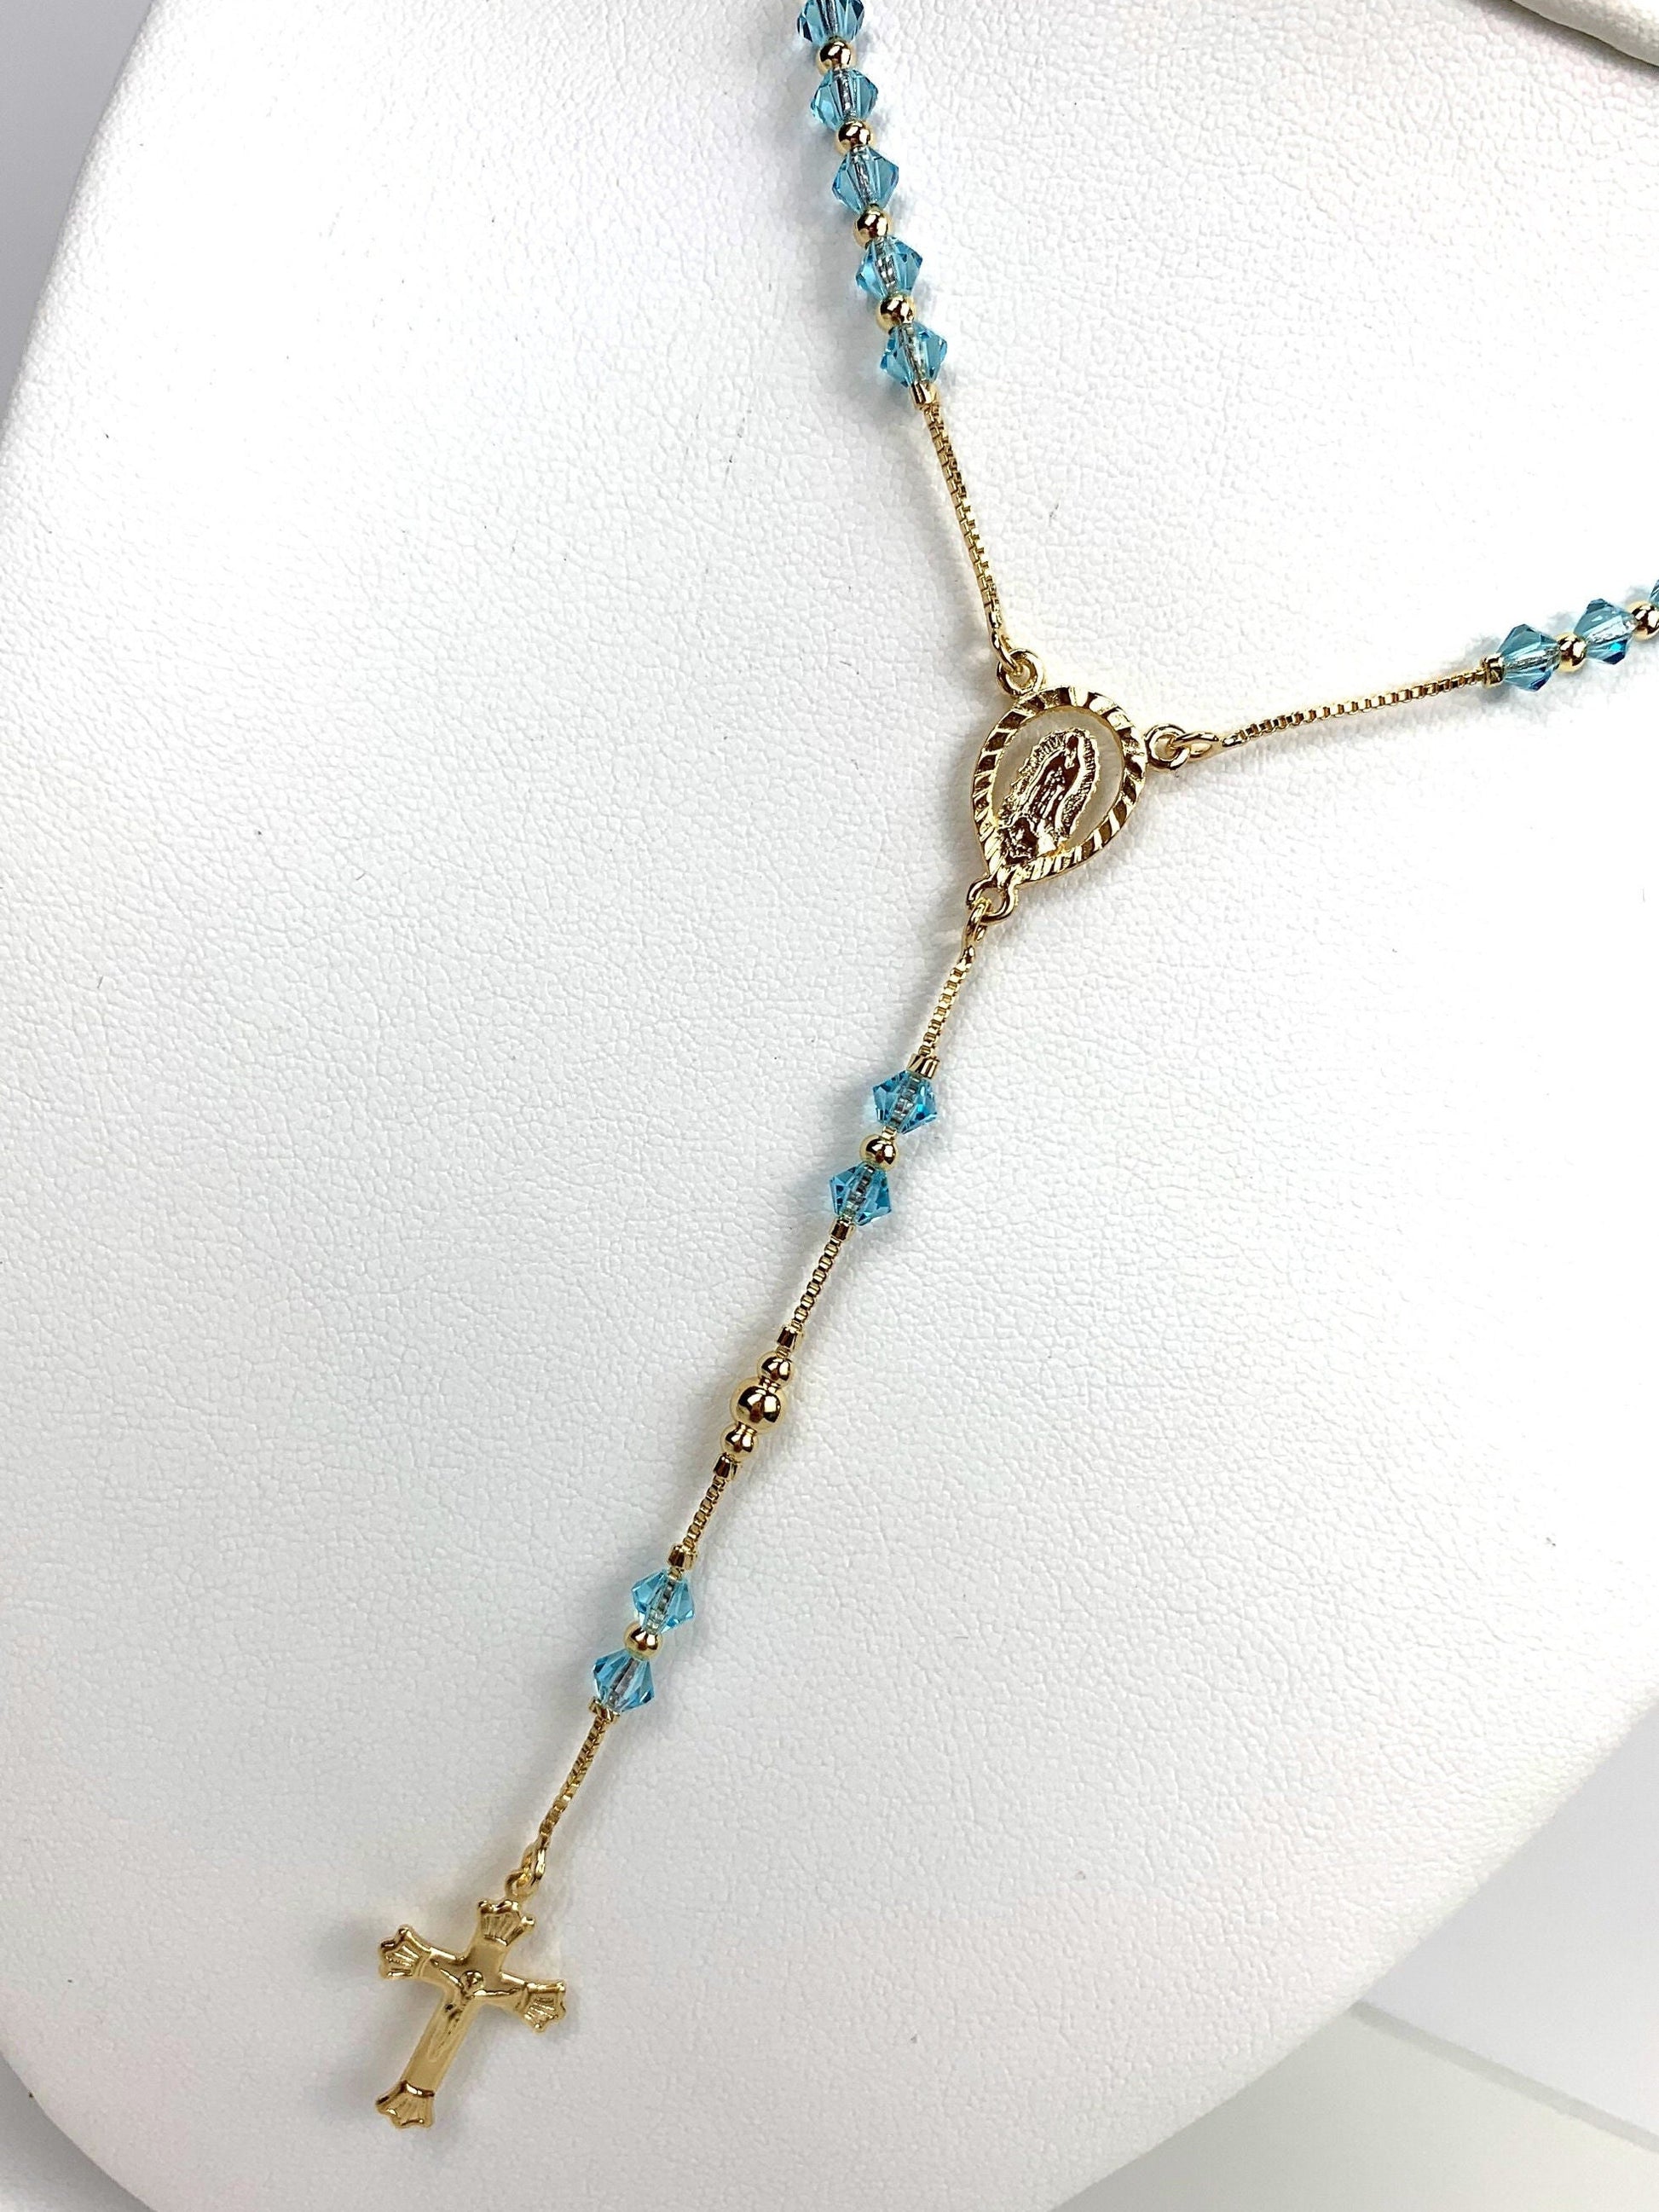 18k Gold Filled Aquamarine Beads Our Lady of Guadalupe (Virgen de Guadalupe) Rosary, Religious Protection, Wholesale and Jewelry Supplies